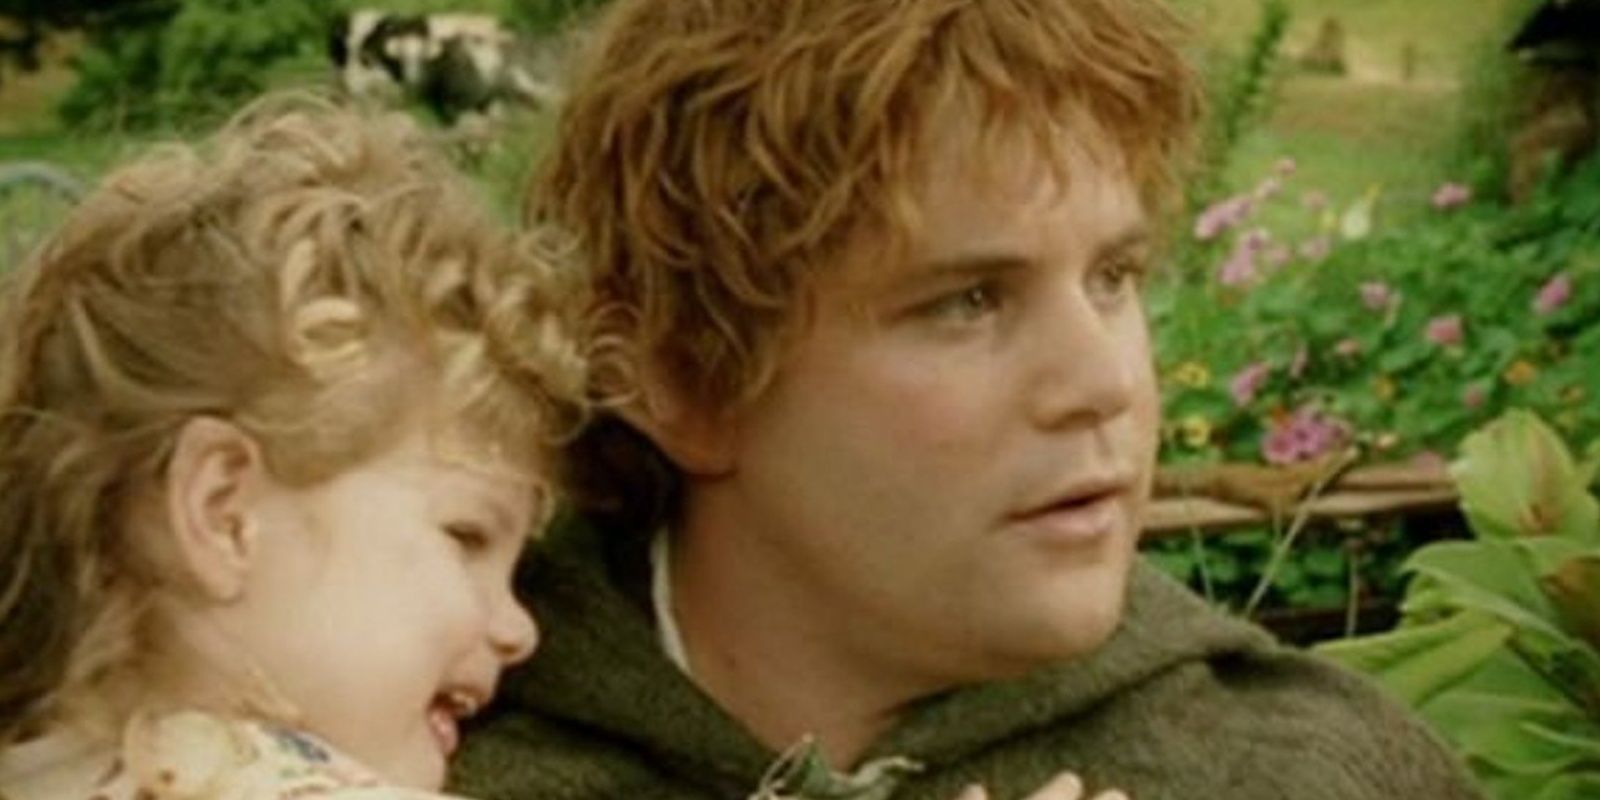 Sam carrying a baby in LotR